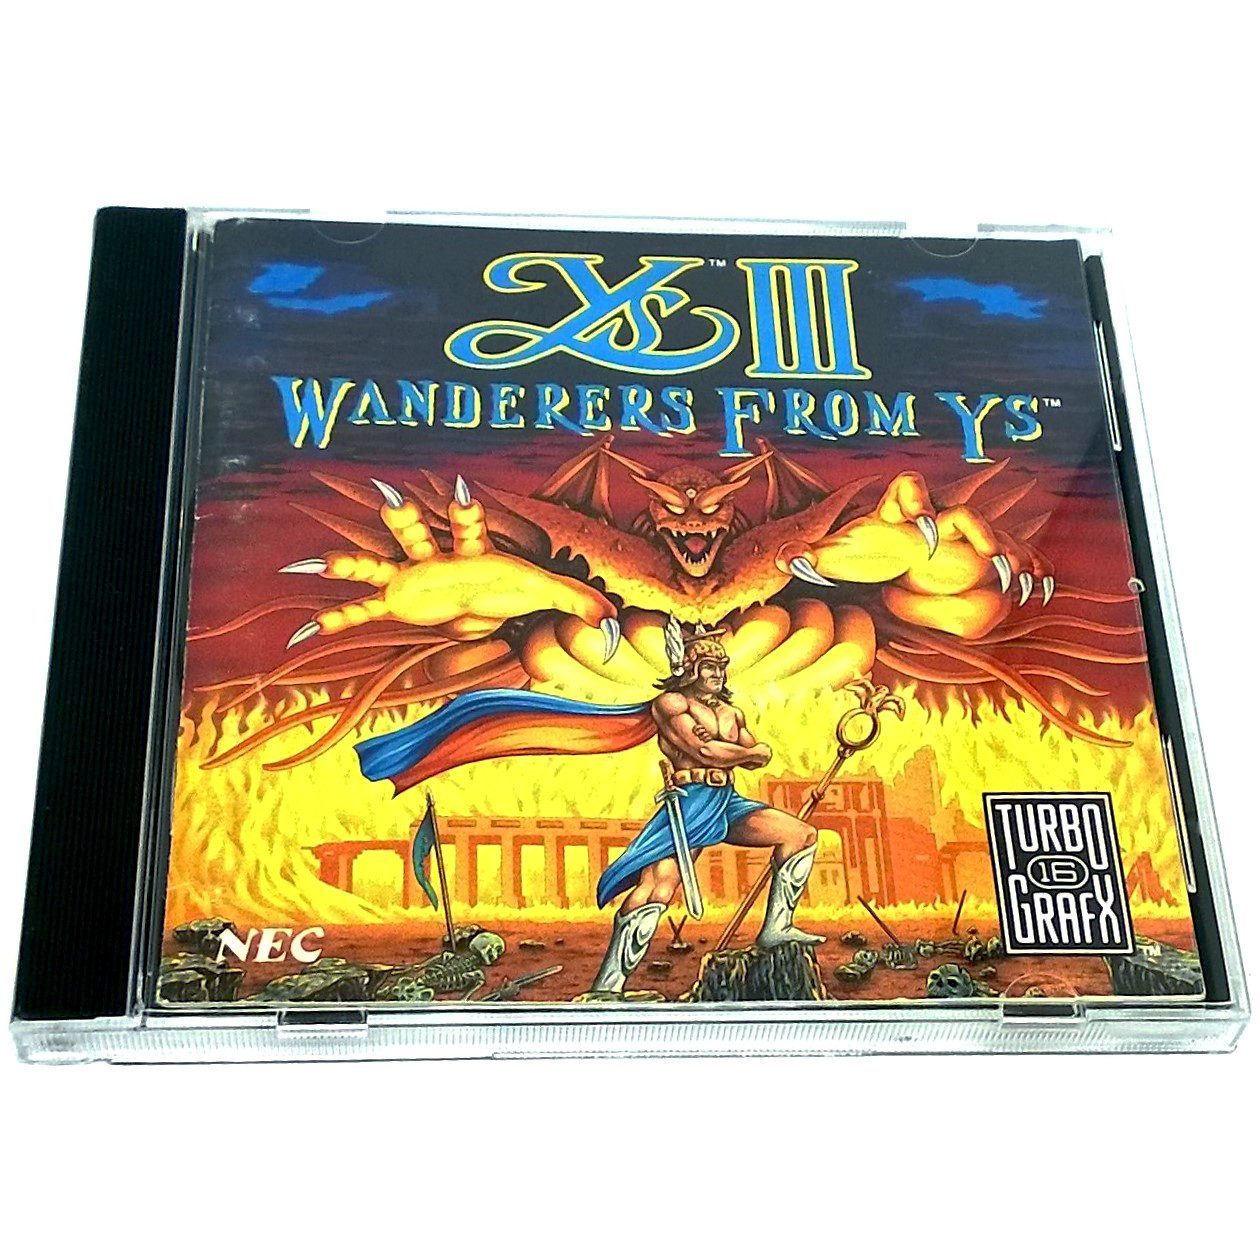 Ys III: Wanderers from Ys for TurboGrafx-16 CD - Front of case